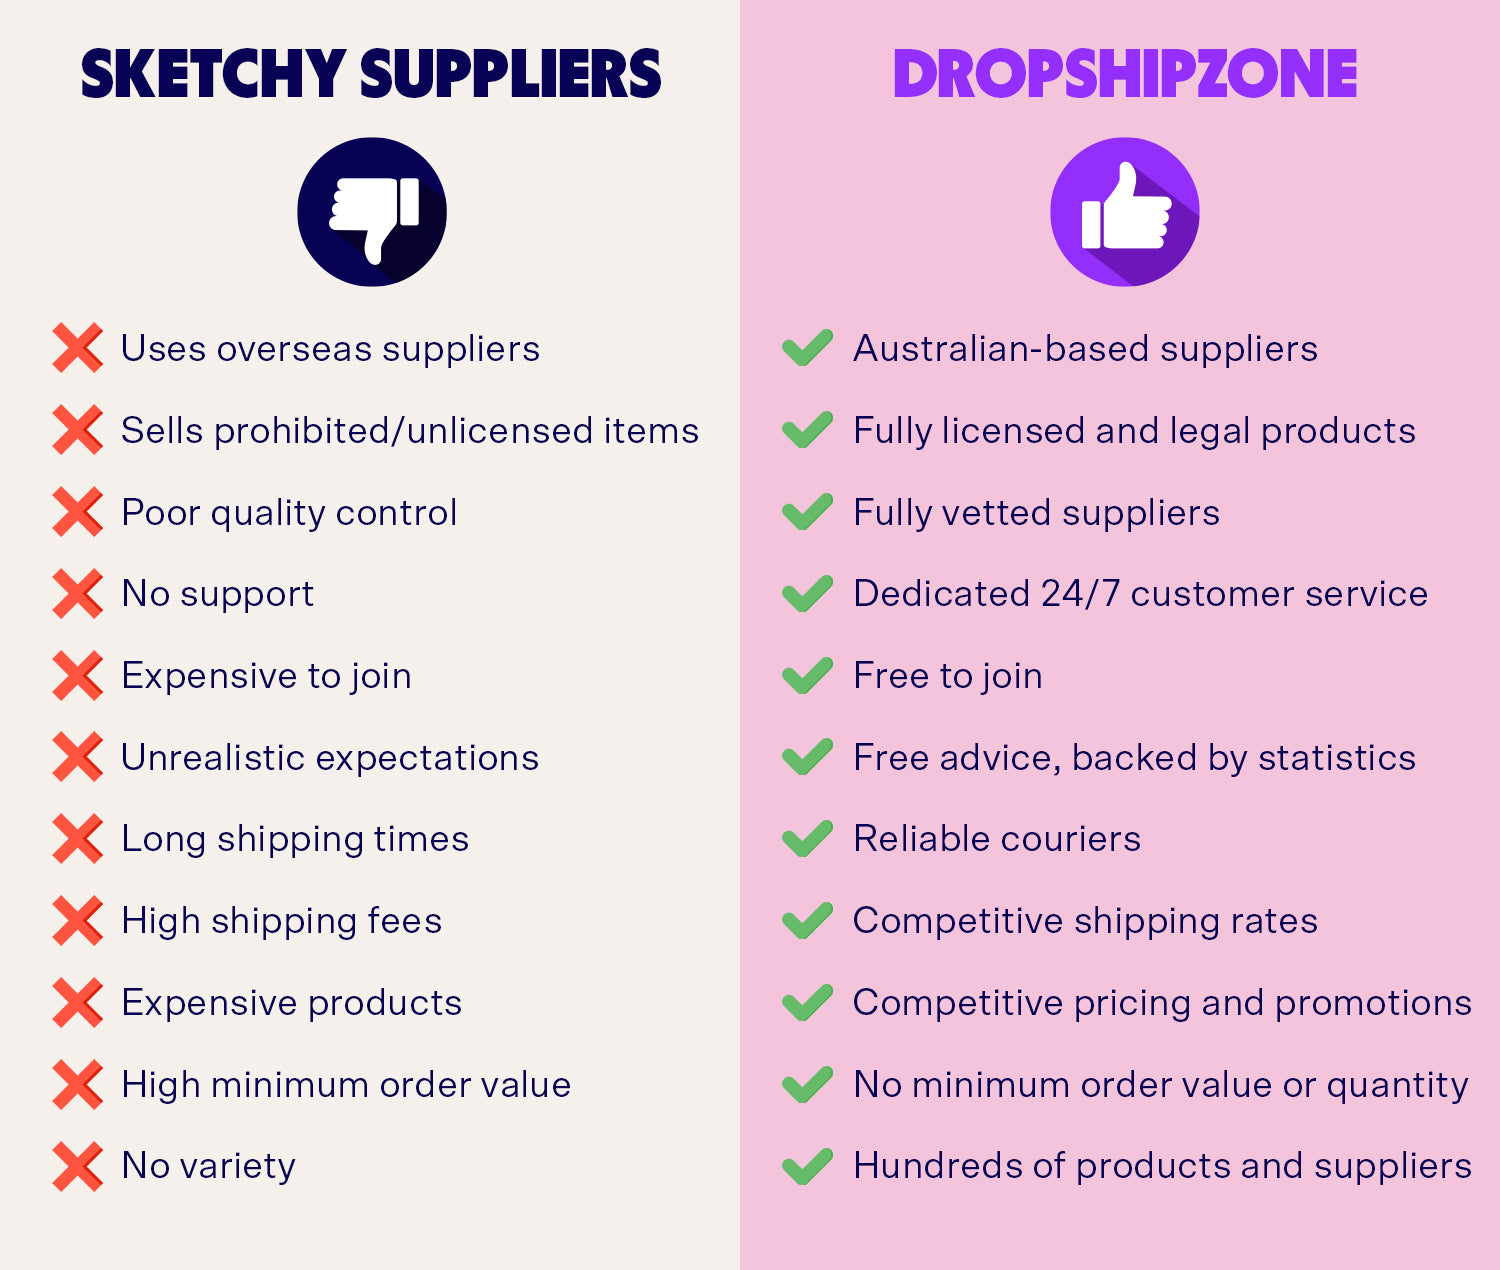 Join Dropshipzone today and see the benefits of a dropshipping model when you work with reliable Australian suppliers and a dedicated customer service team.